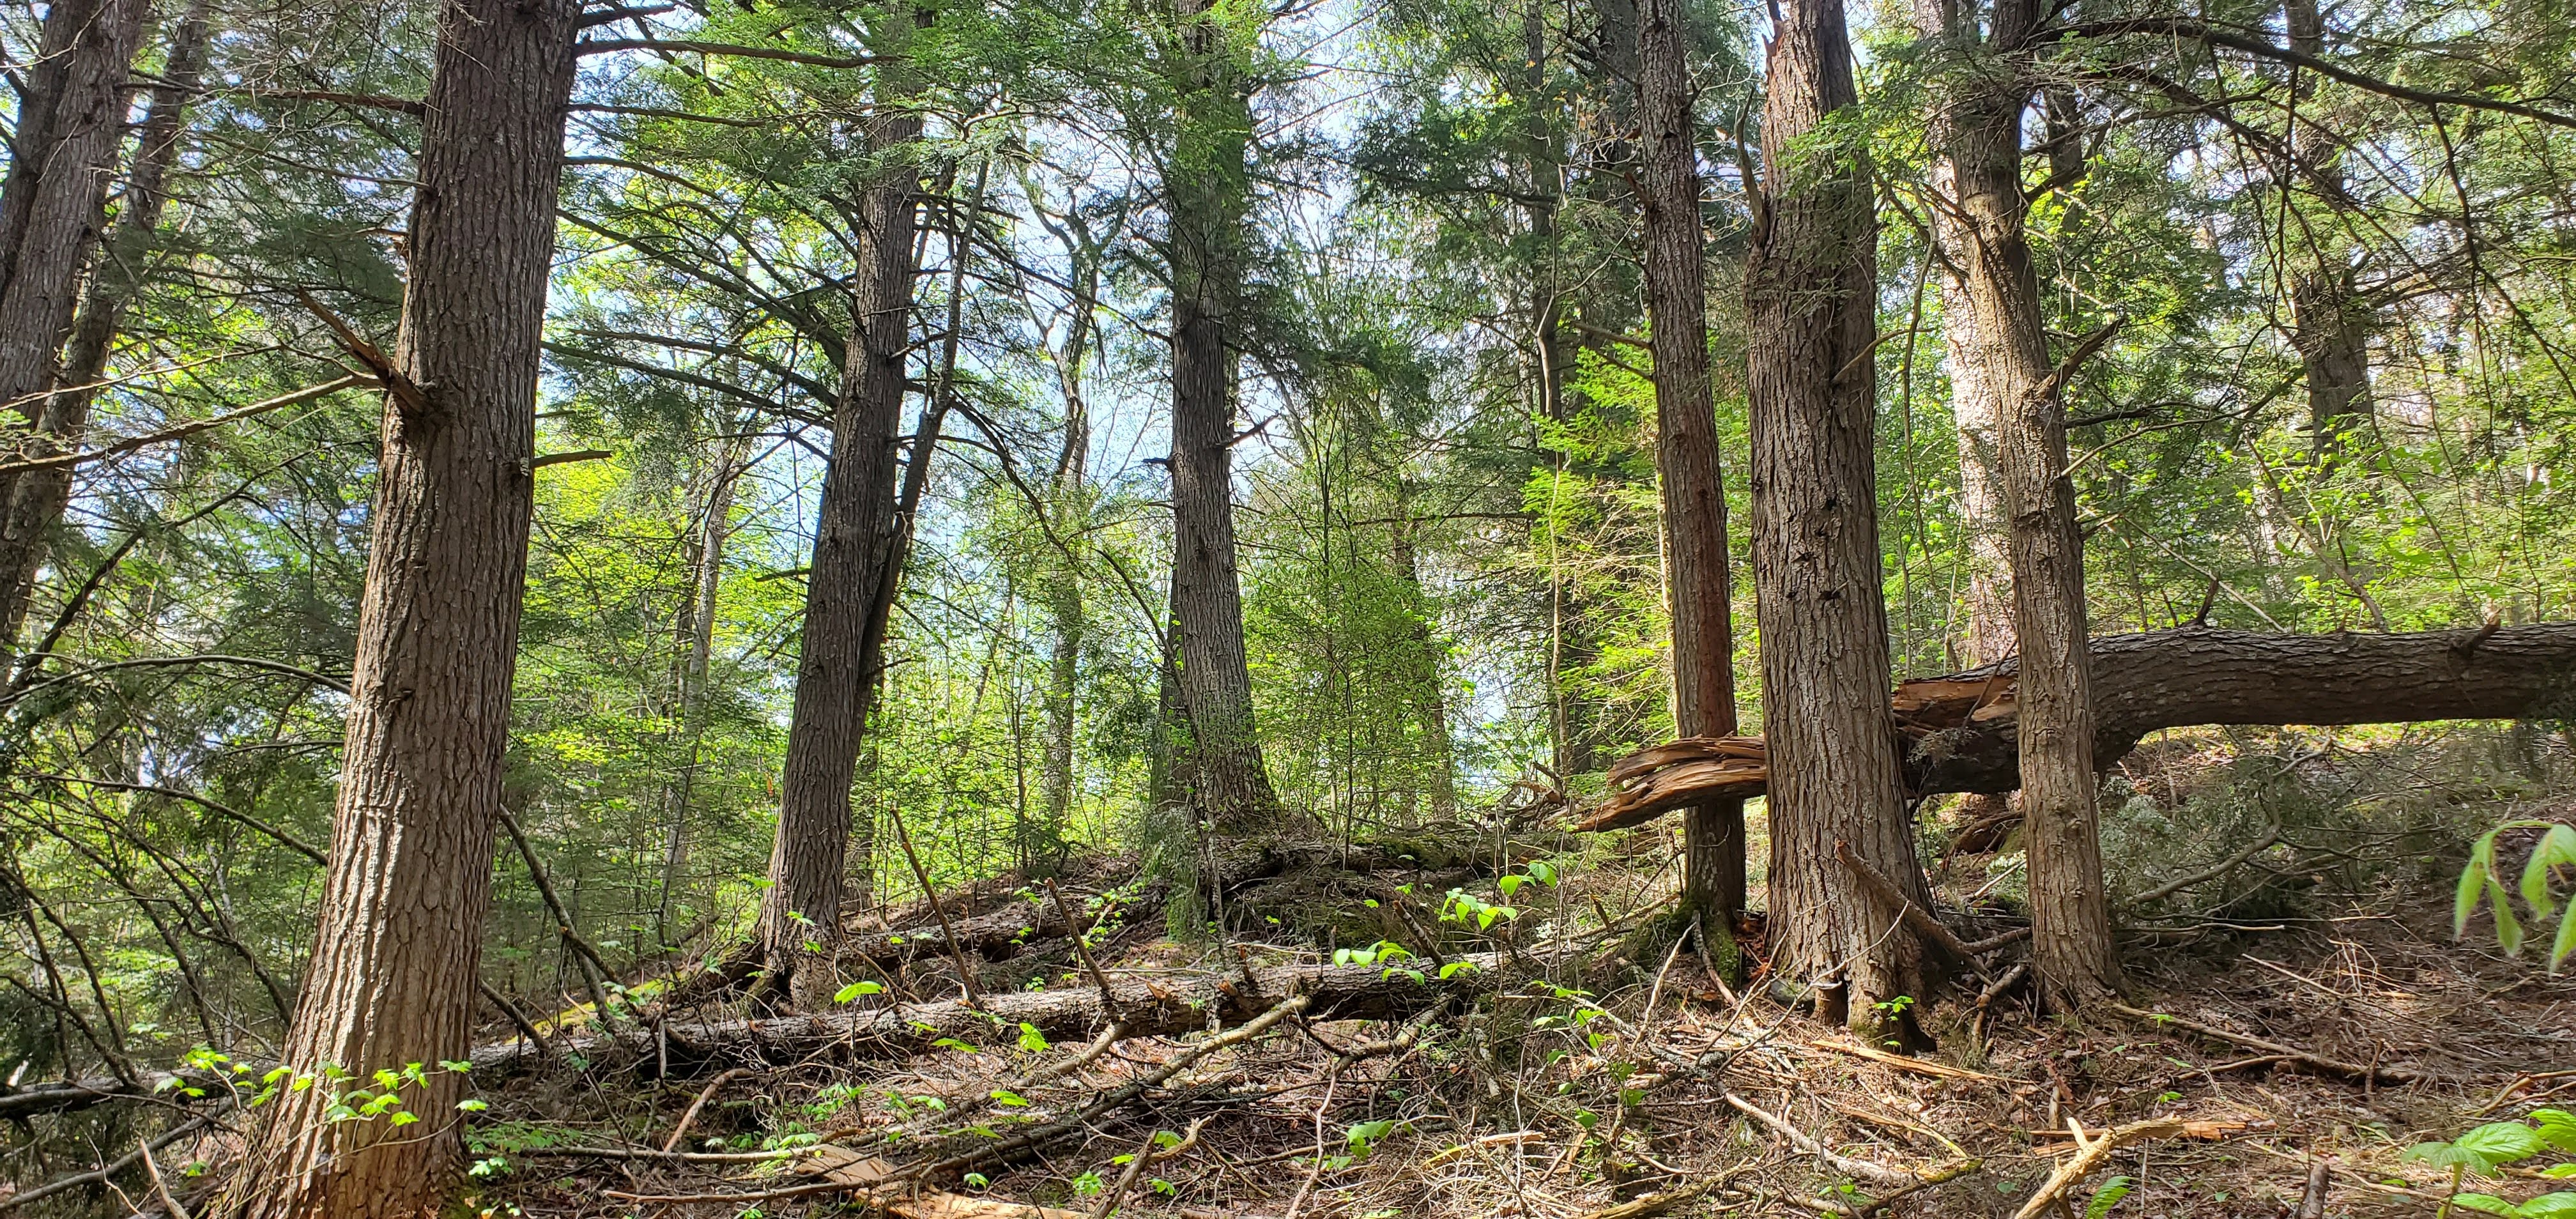 Algonquin old-growth forest